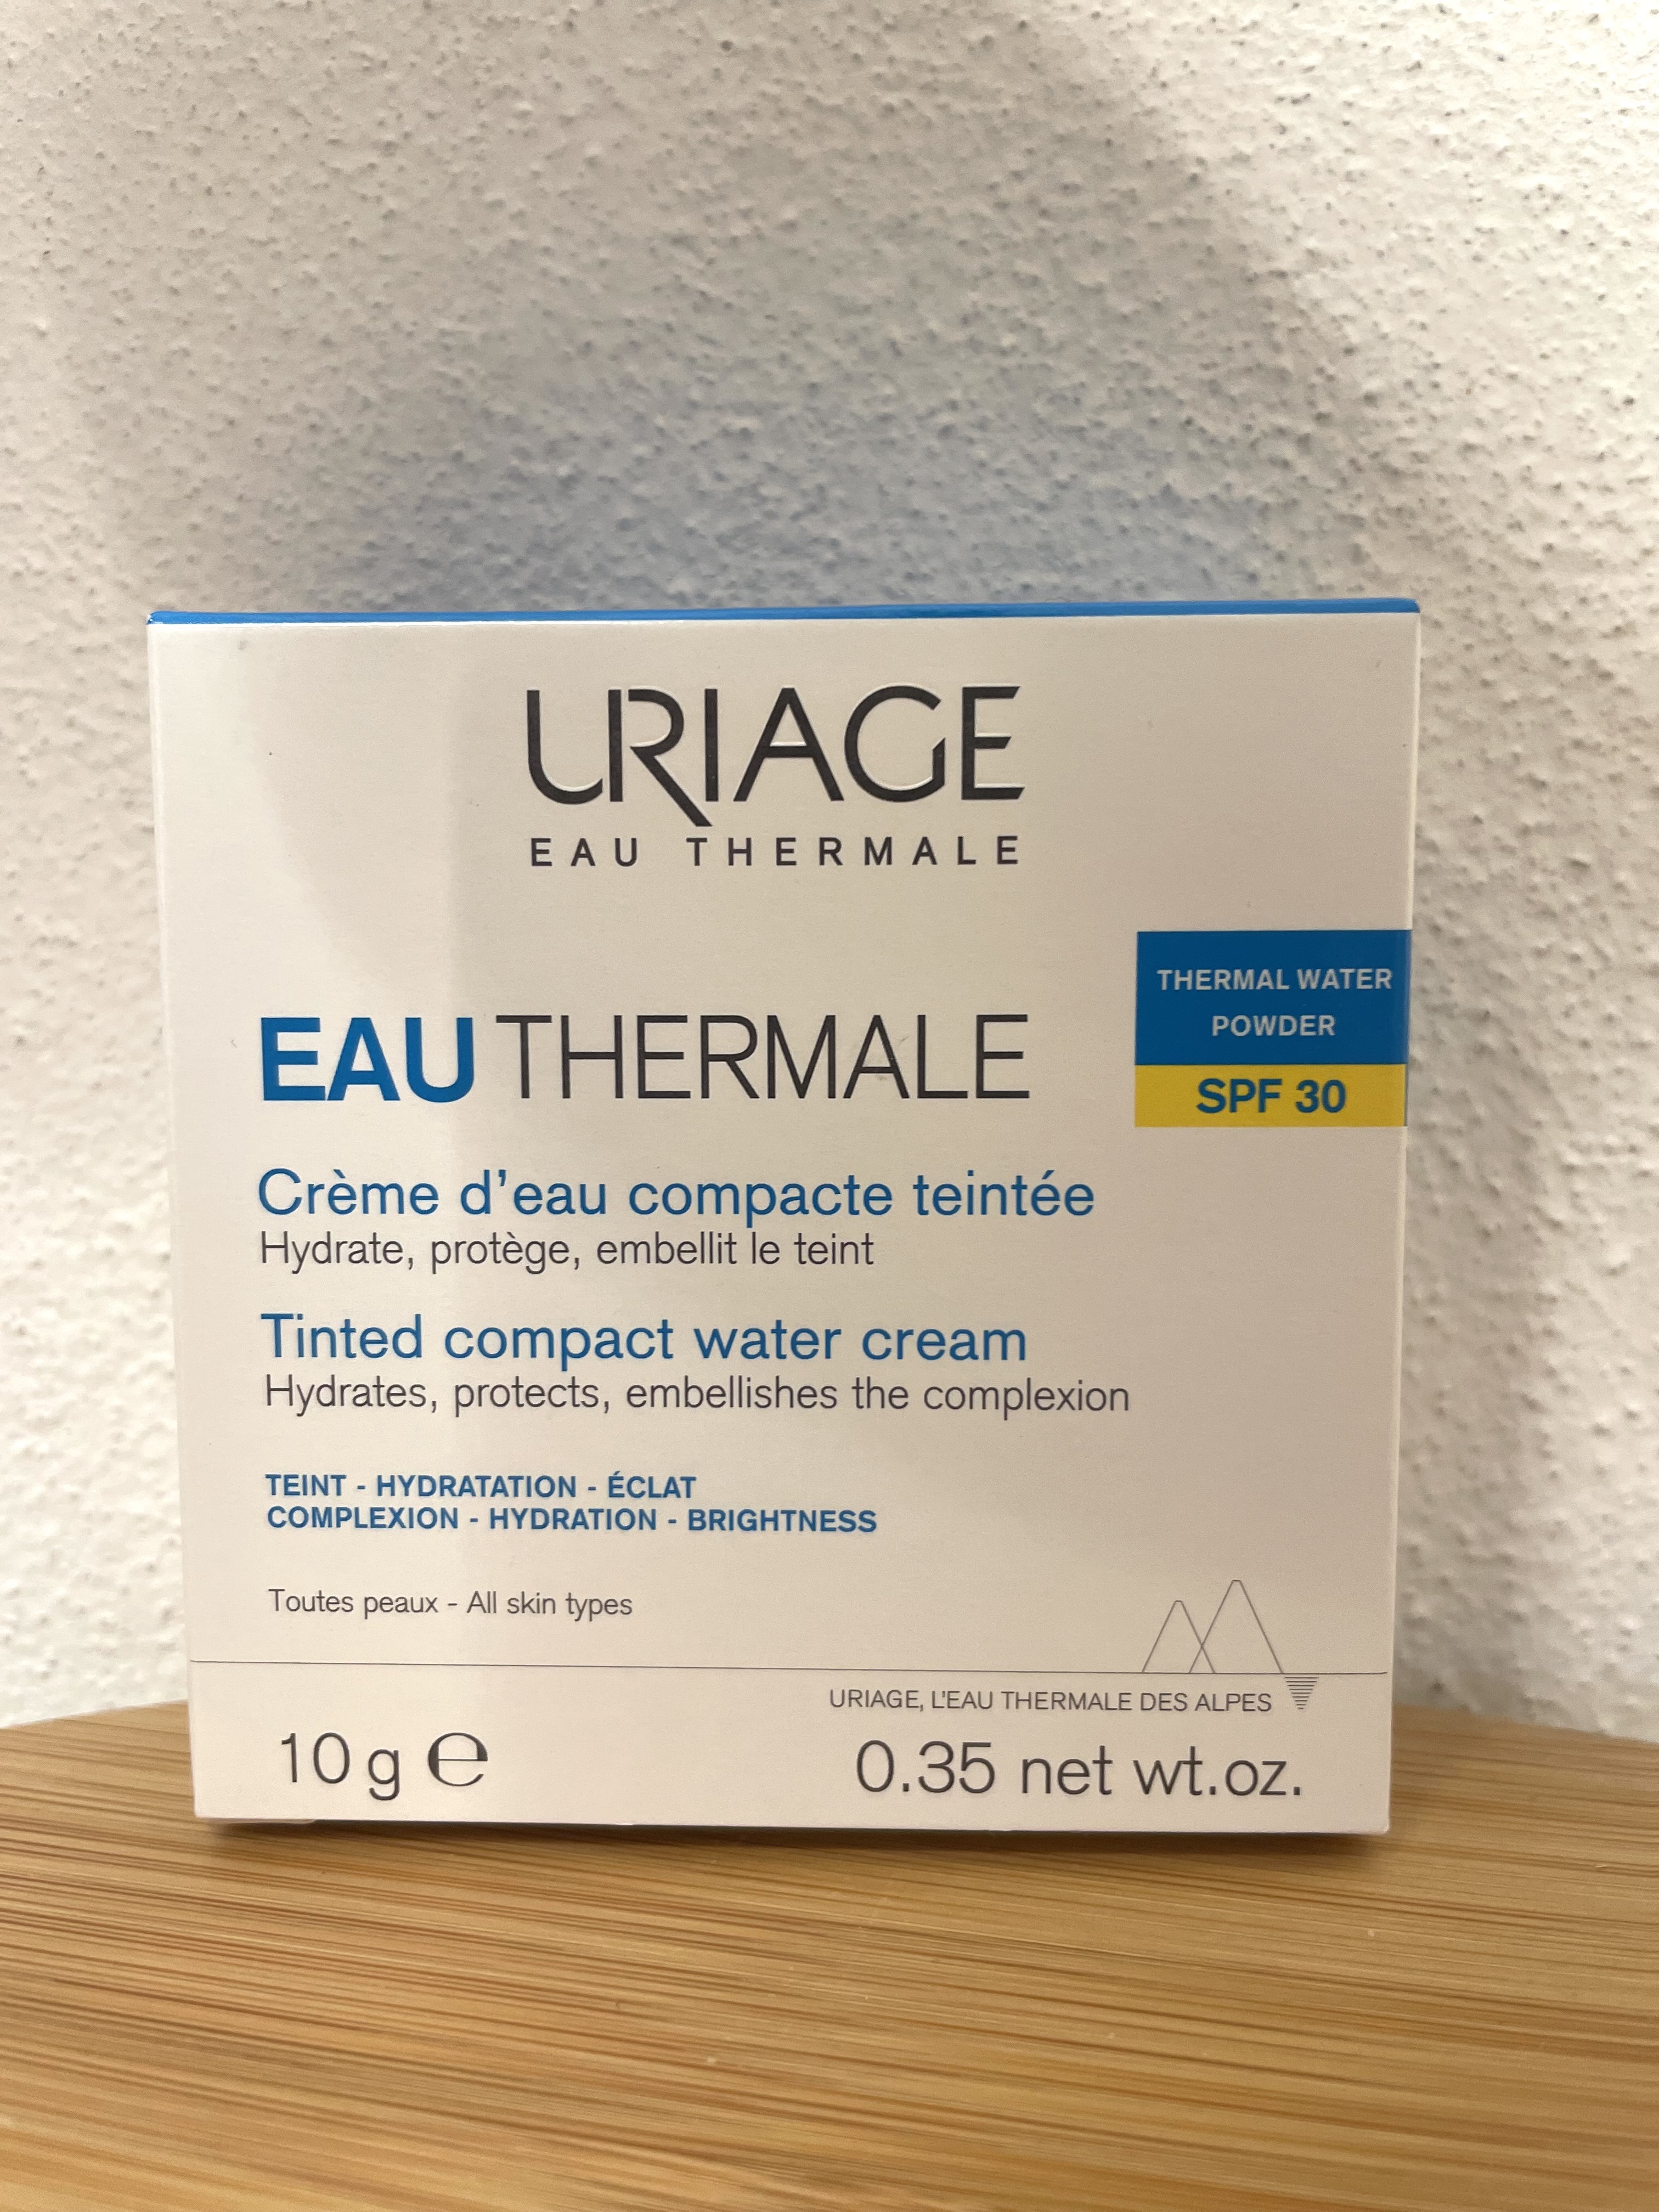 Uriage: Eau thermale Tinted compact water cream